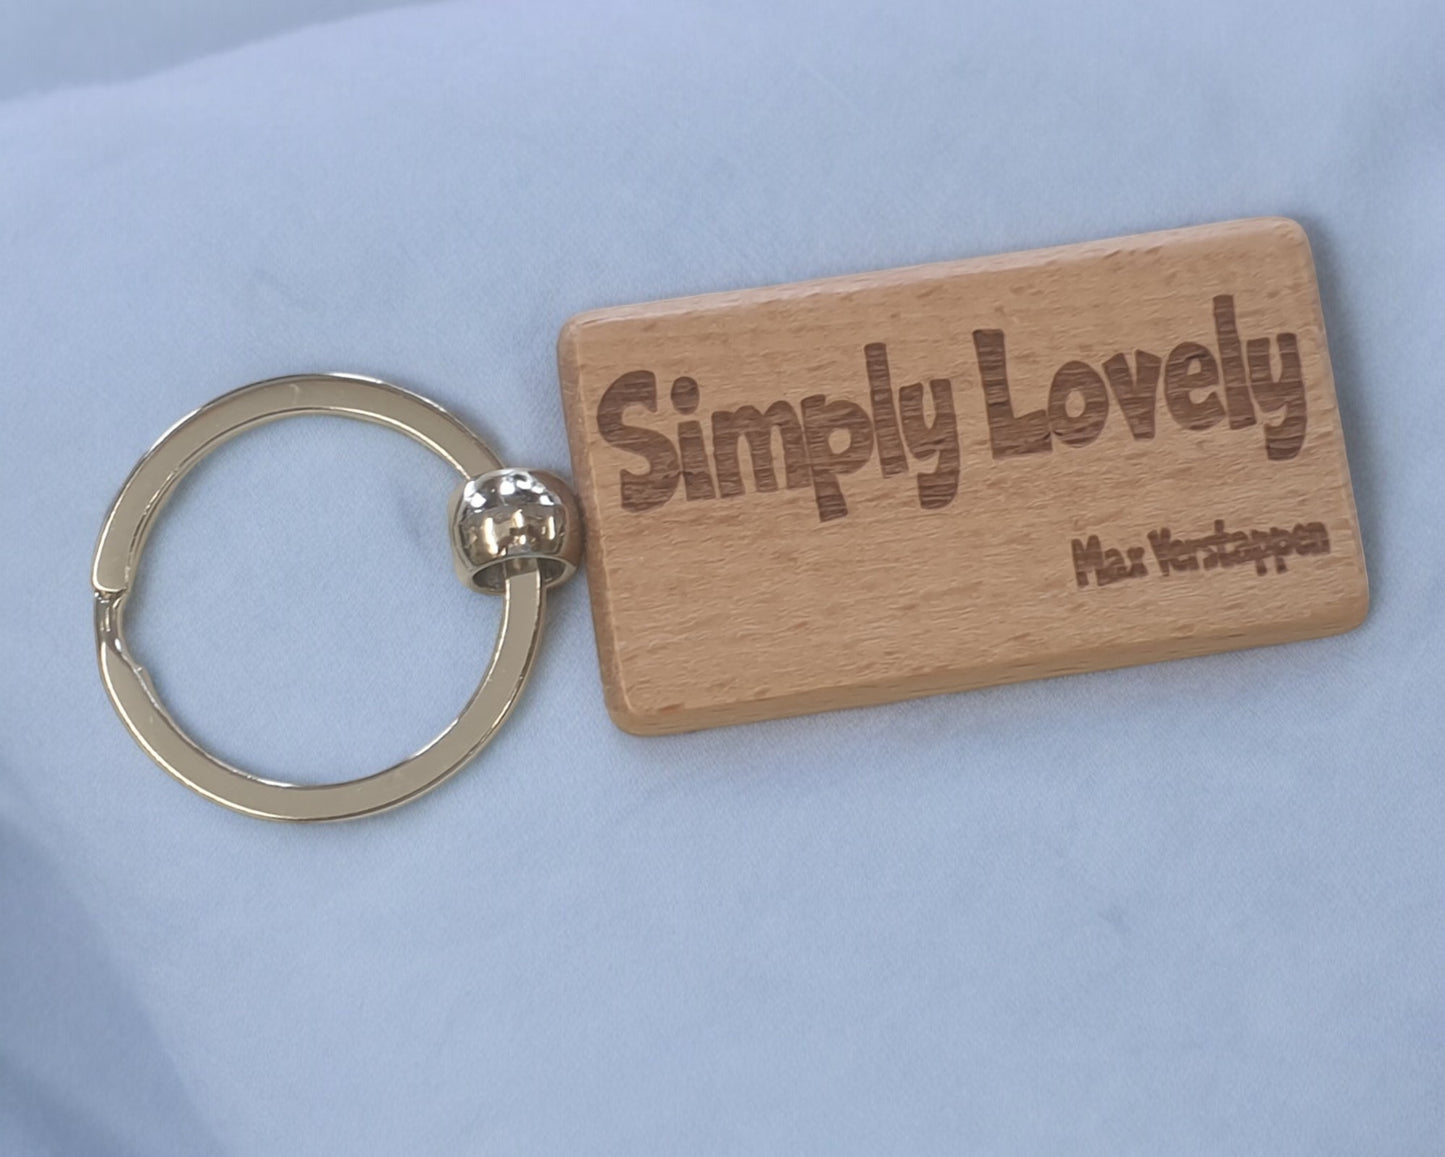 Max Verstappen Keyring Gift Simply Lovely Engraved Wooden Key Fob Fun Novelty Nice F1 Present